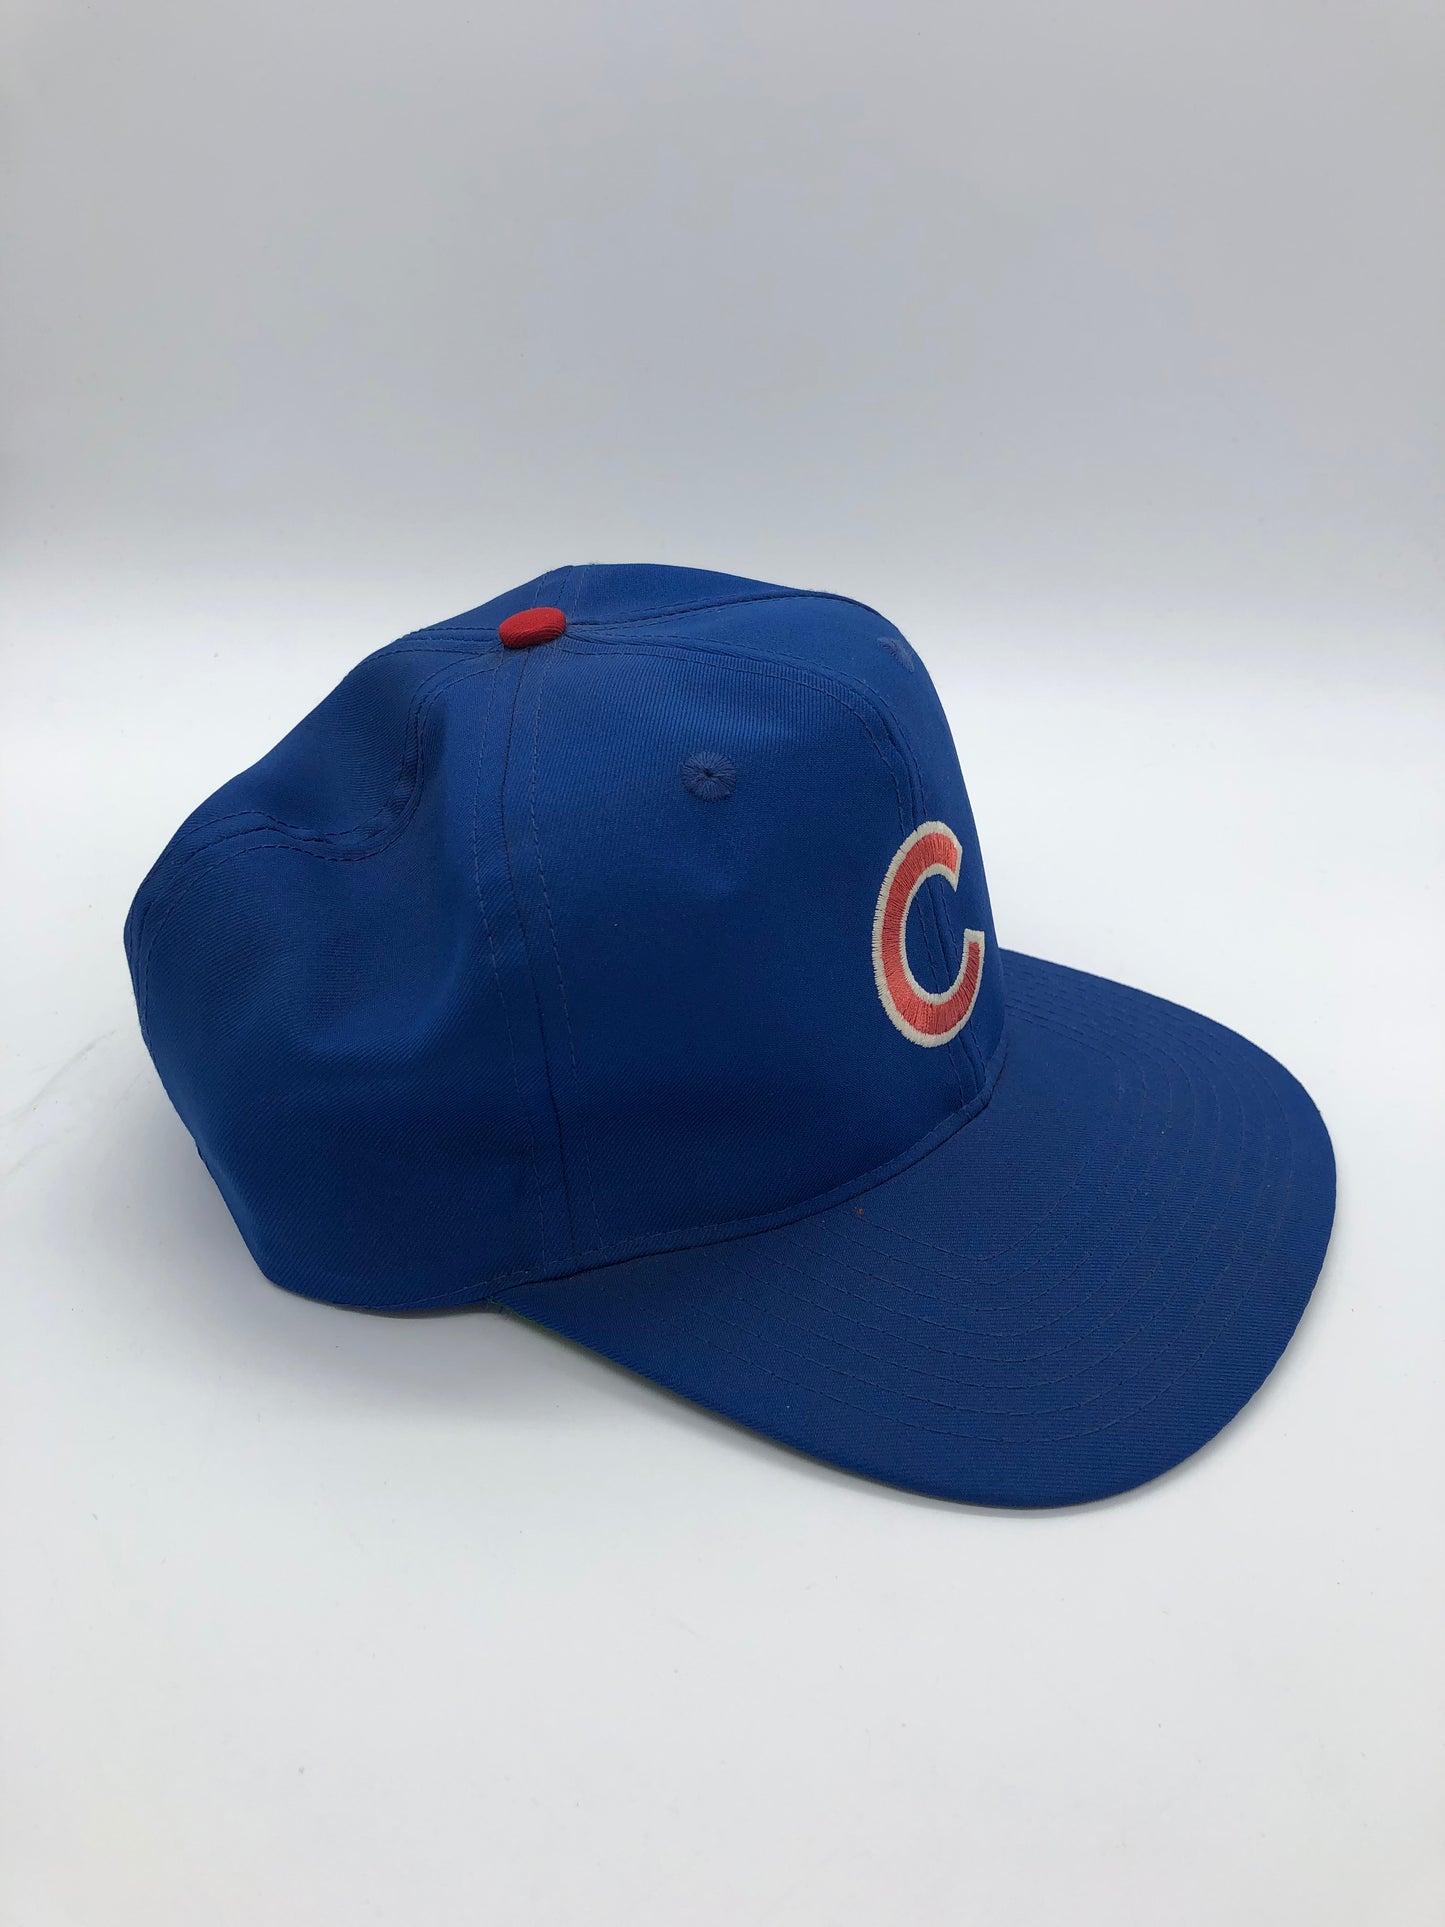 VTG Chicago Cubs SnapBack by Twins